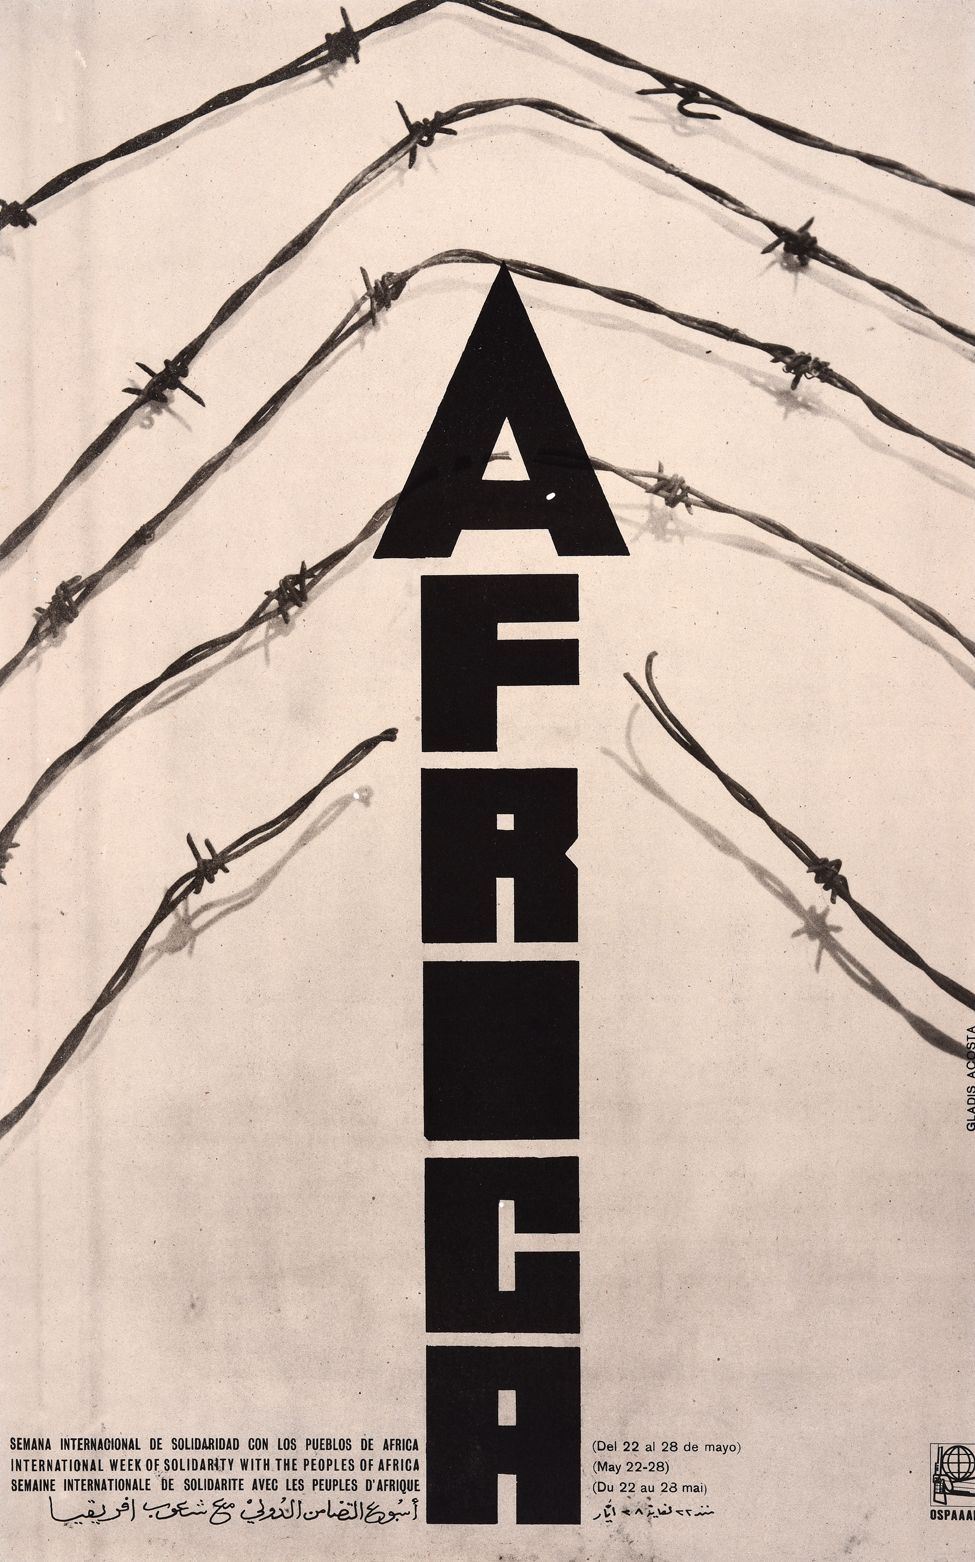 An Ospaal poster called International Week of Solidarity with the Peoples of Africa, 1970, showing the word Africa breaking through barbed wire